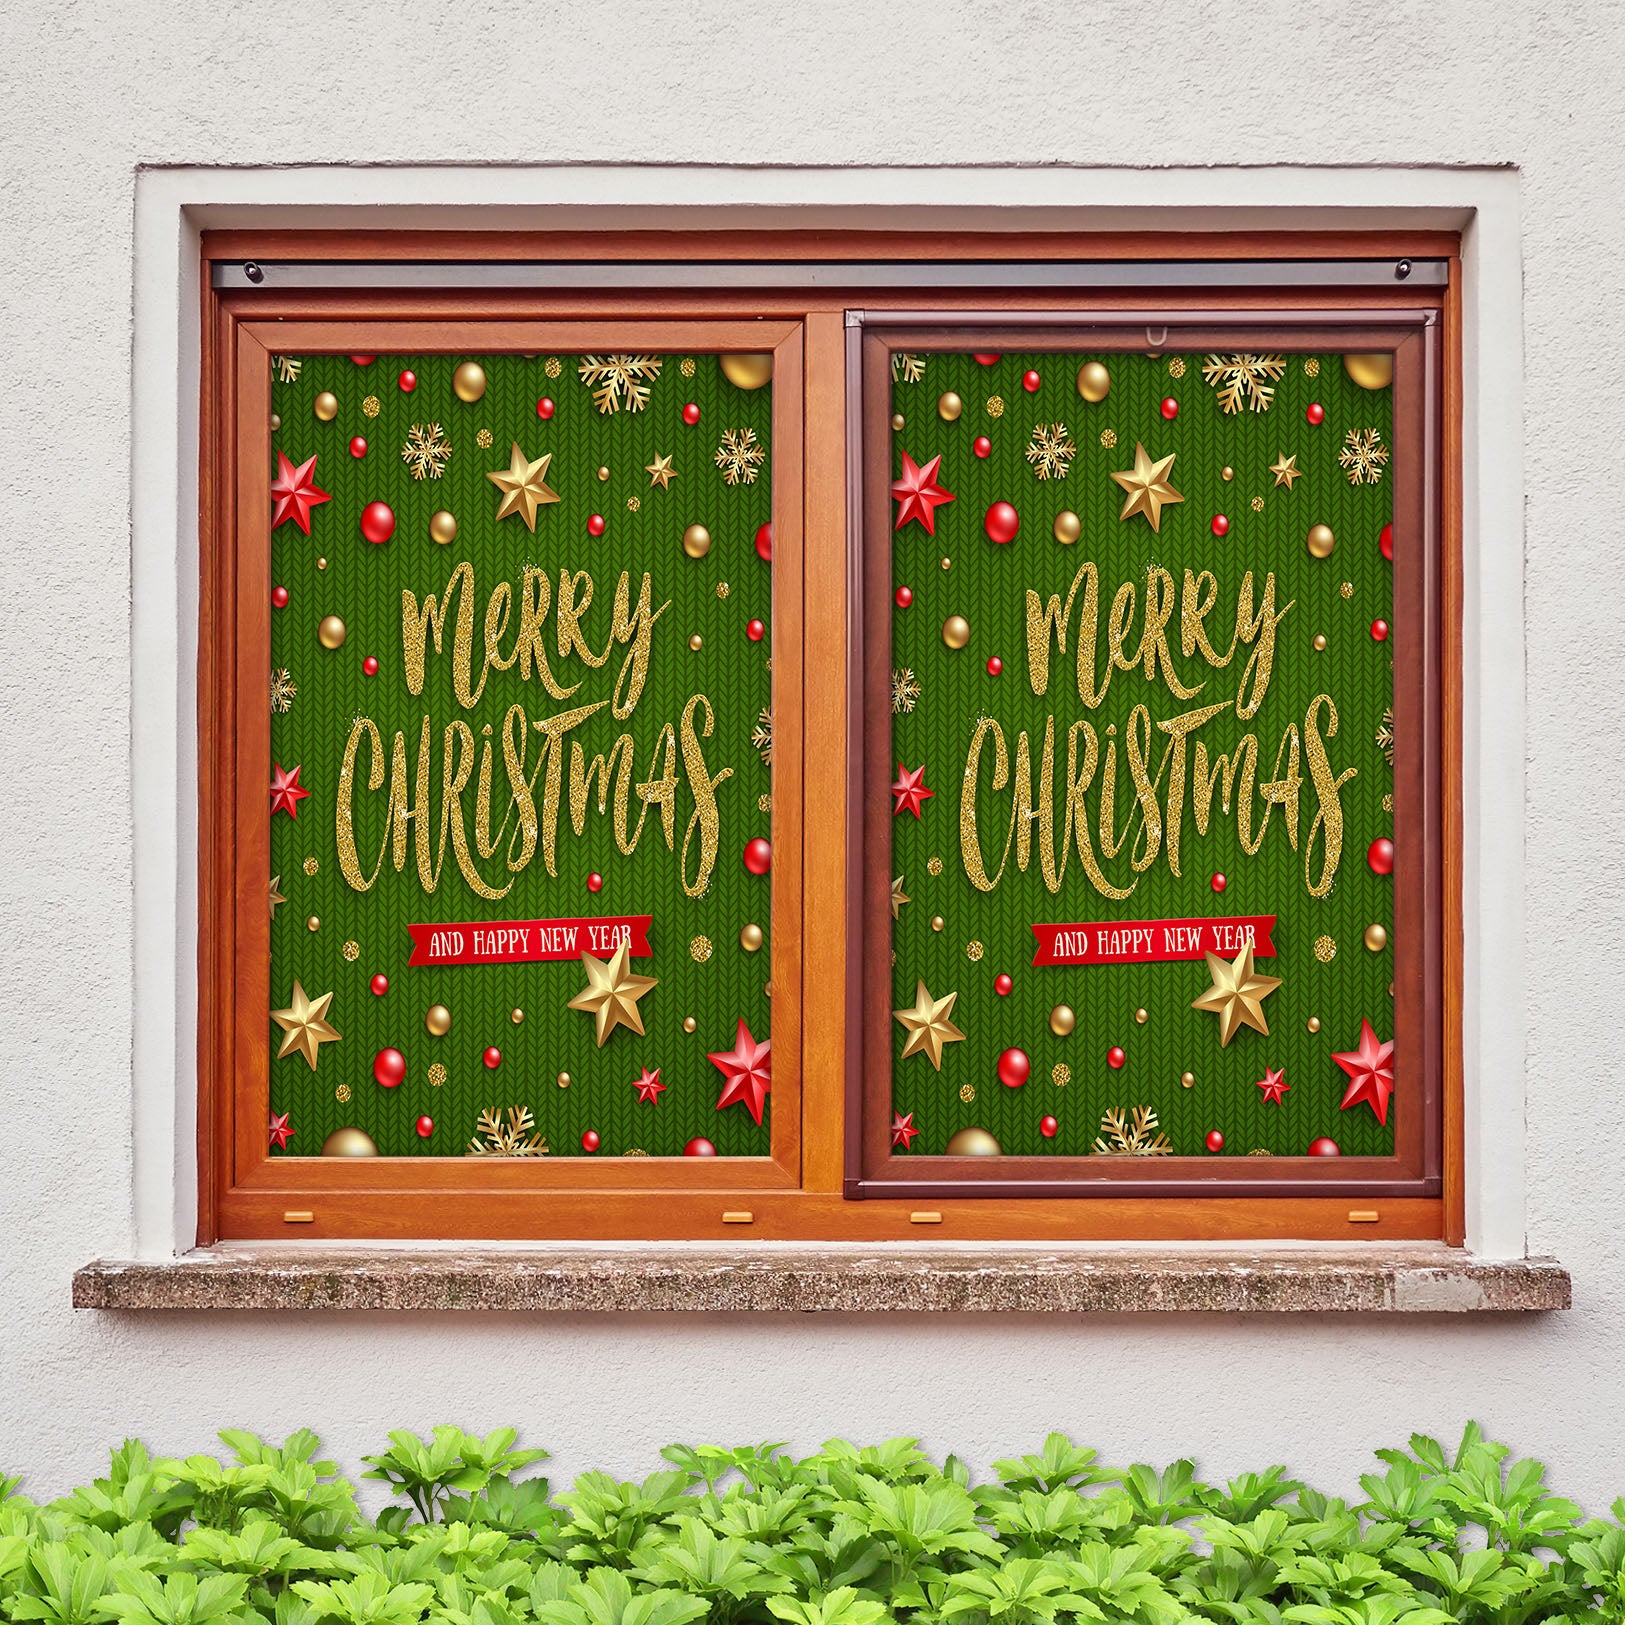 3D Merry Christmas 31053 Christmas Window Film Print Sticker Cling Stained Glass Xmas